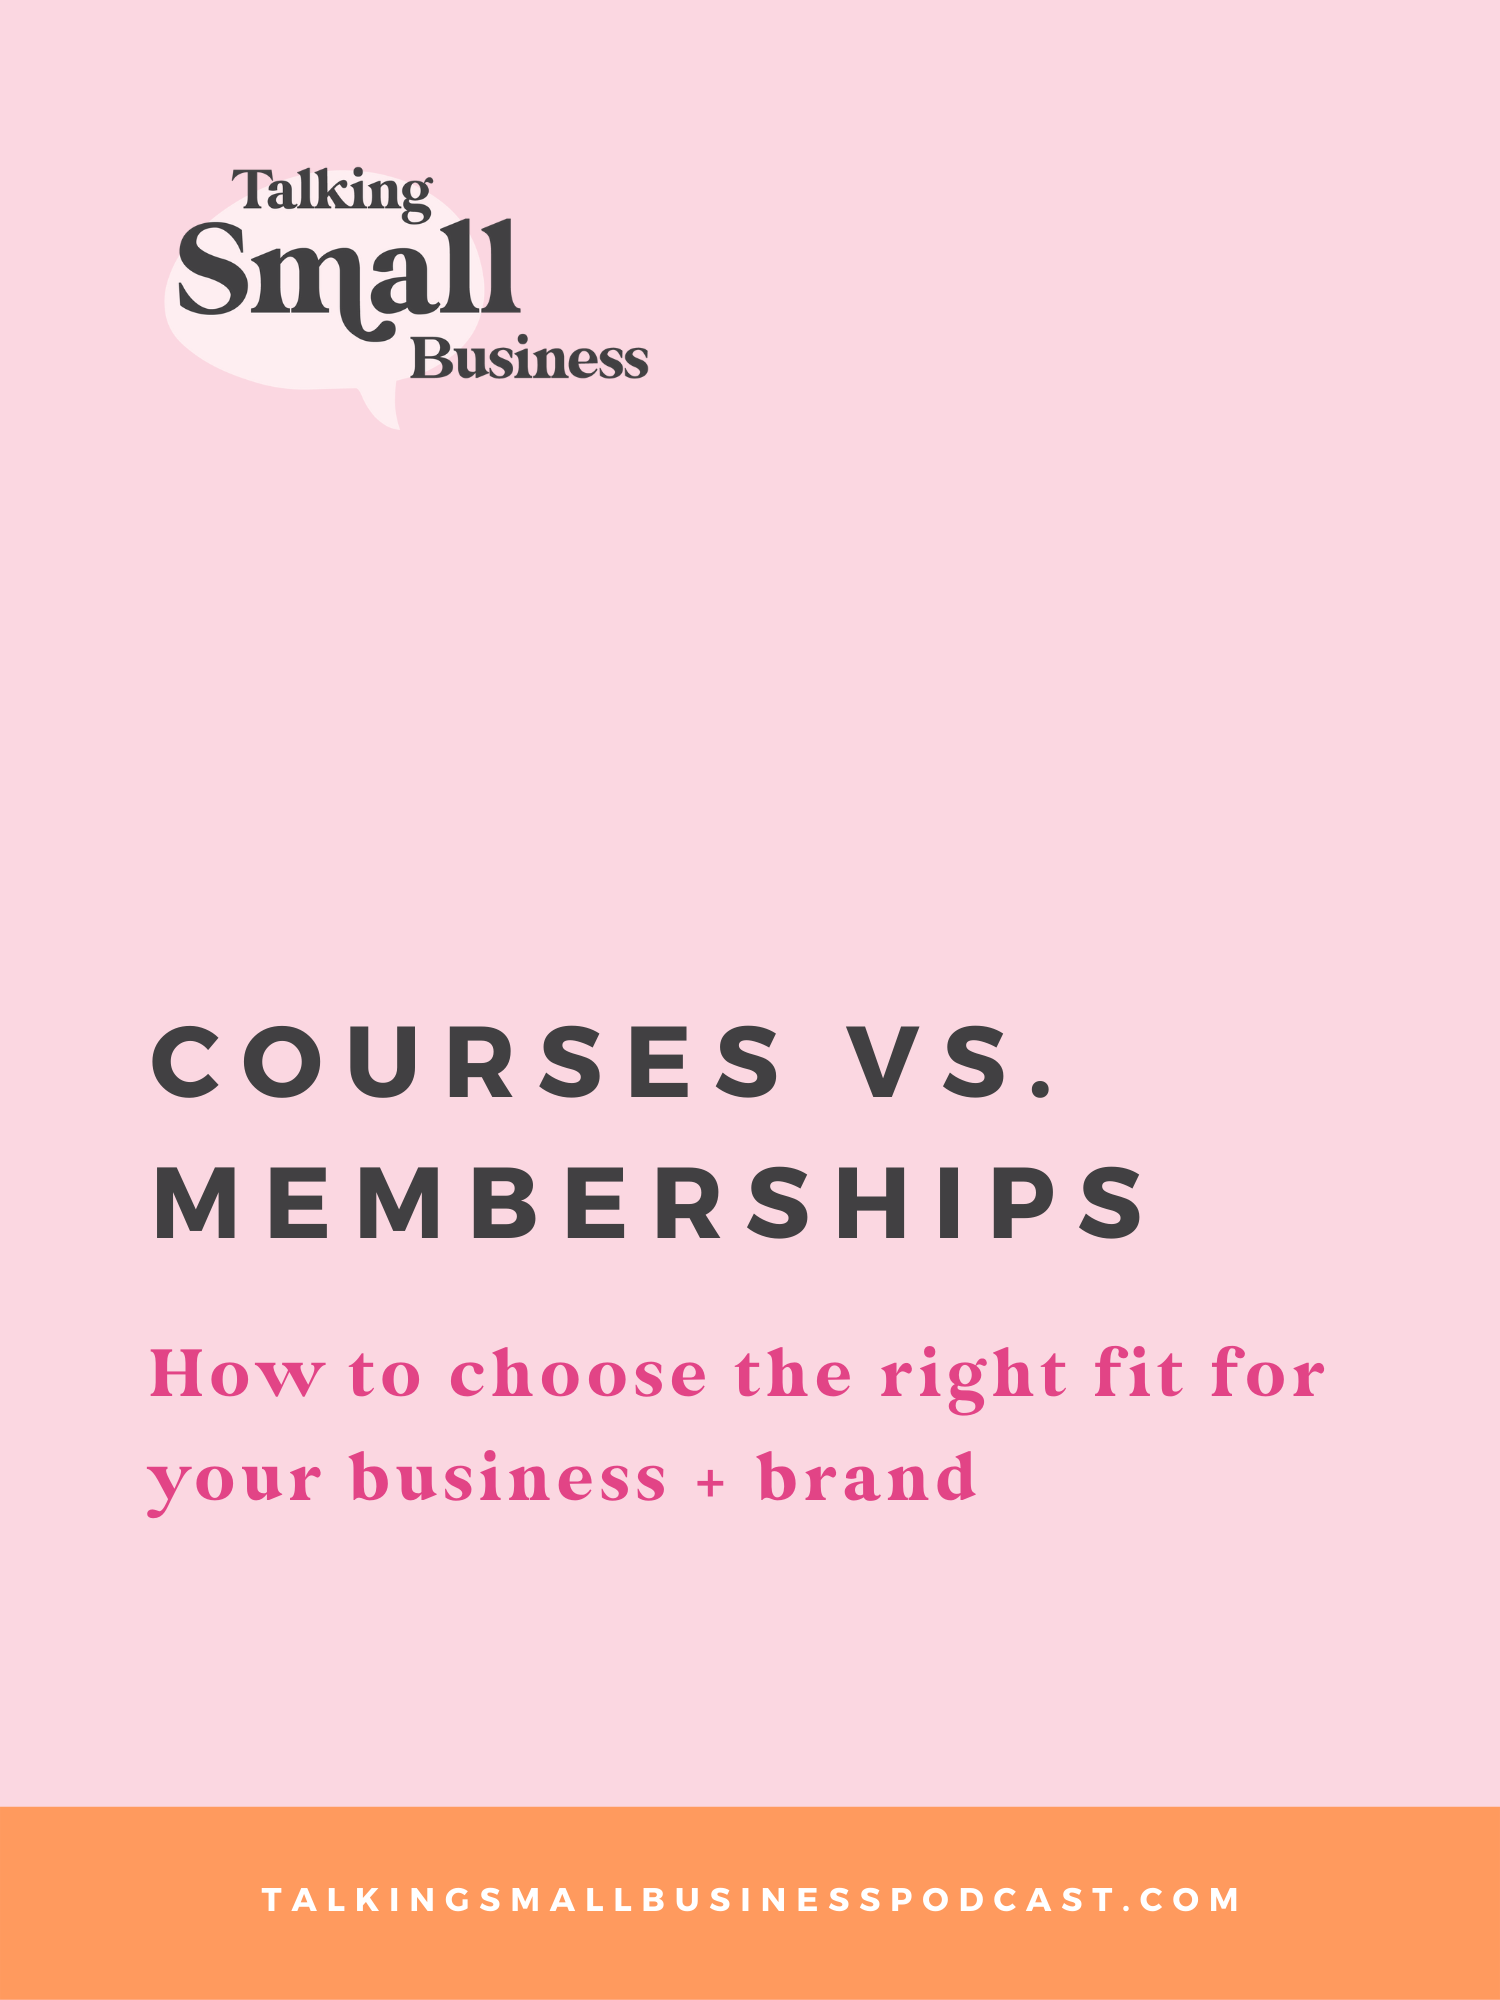 Course vs. Membership: how to decide which digital product to offer as a small business owner shared on Talking Small Business